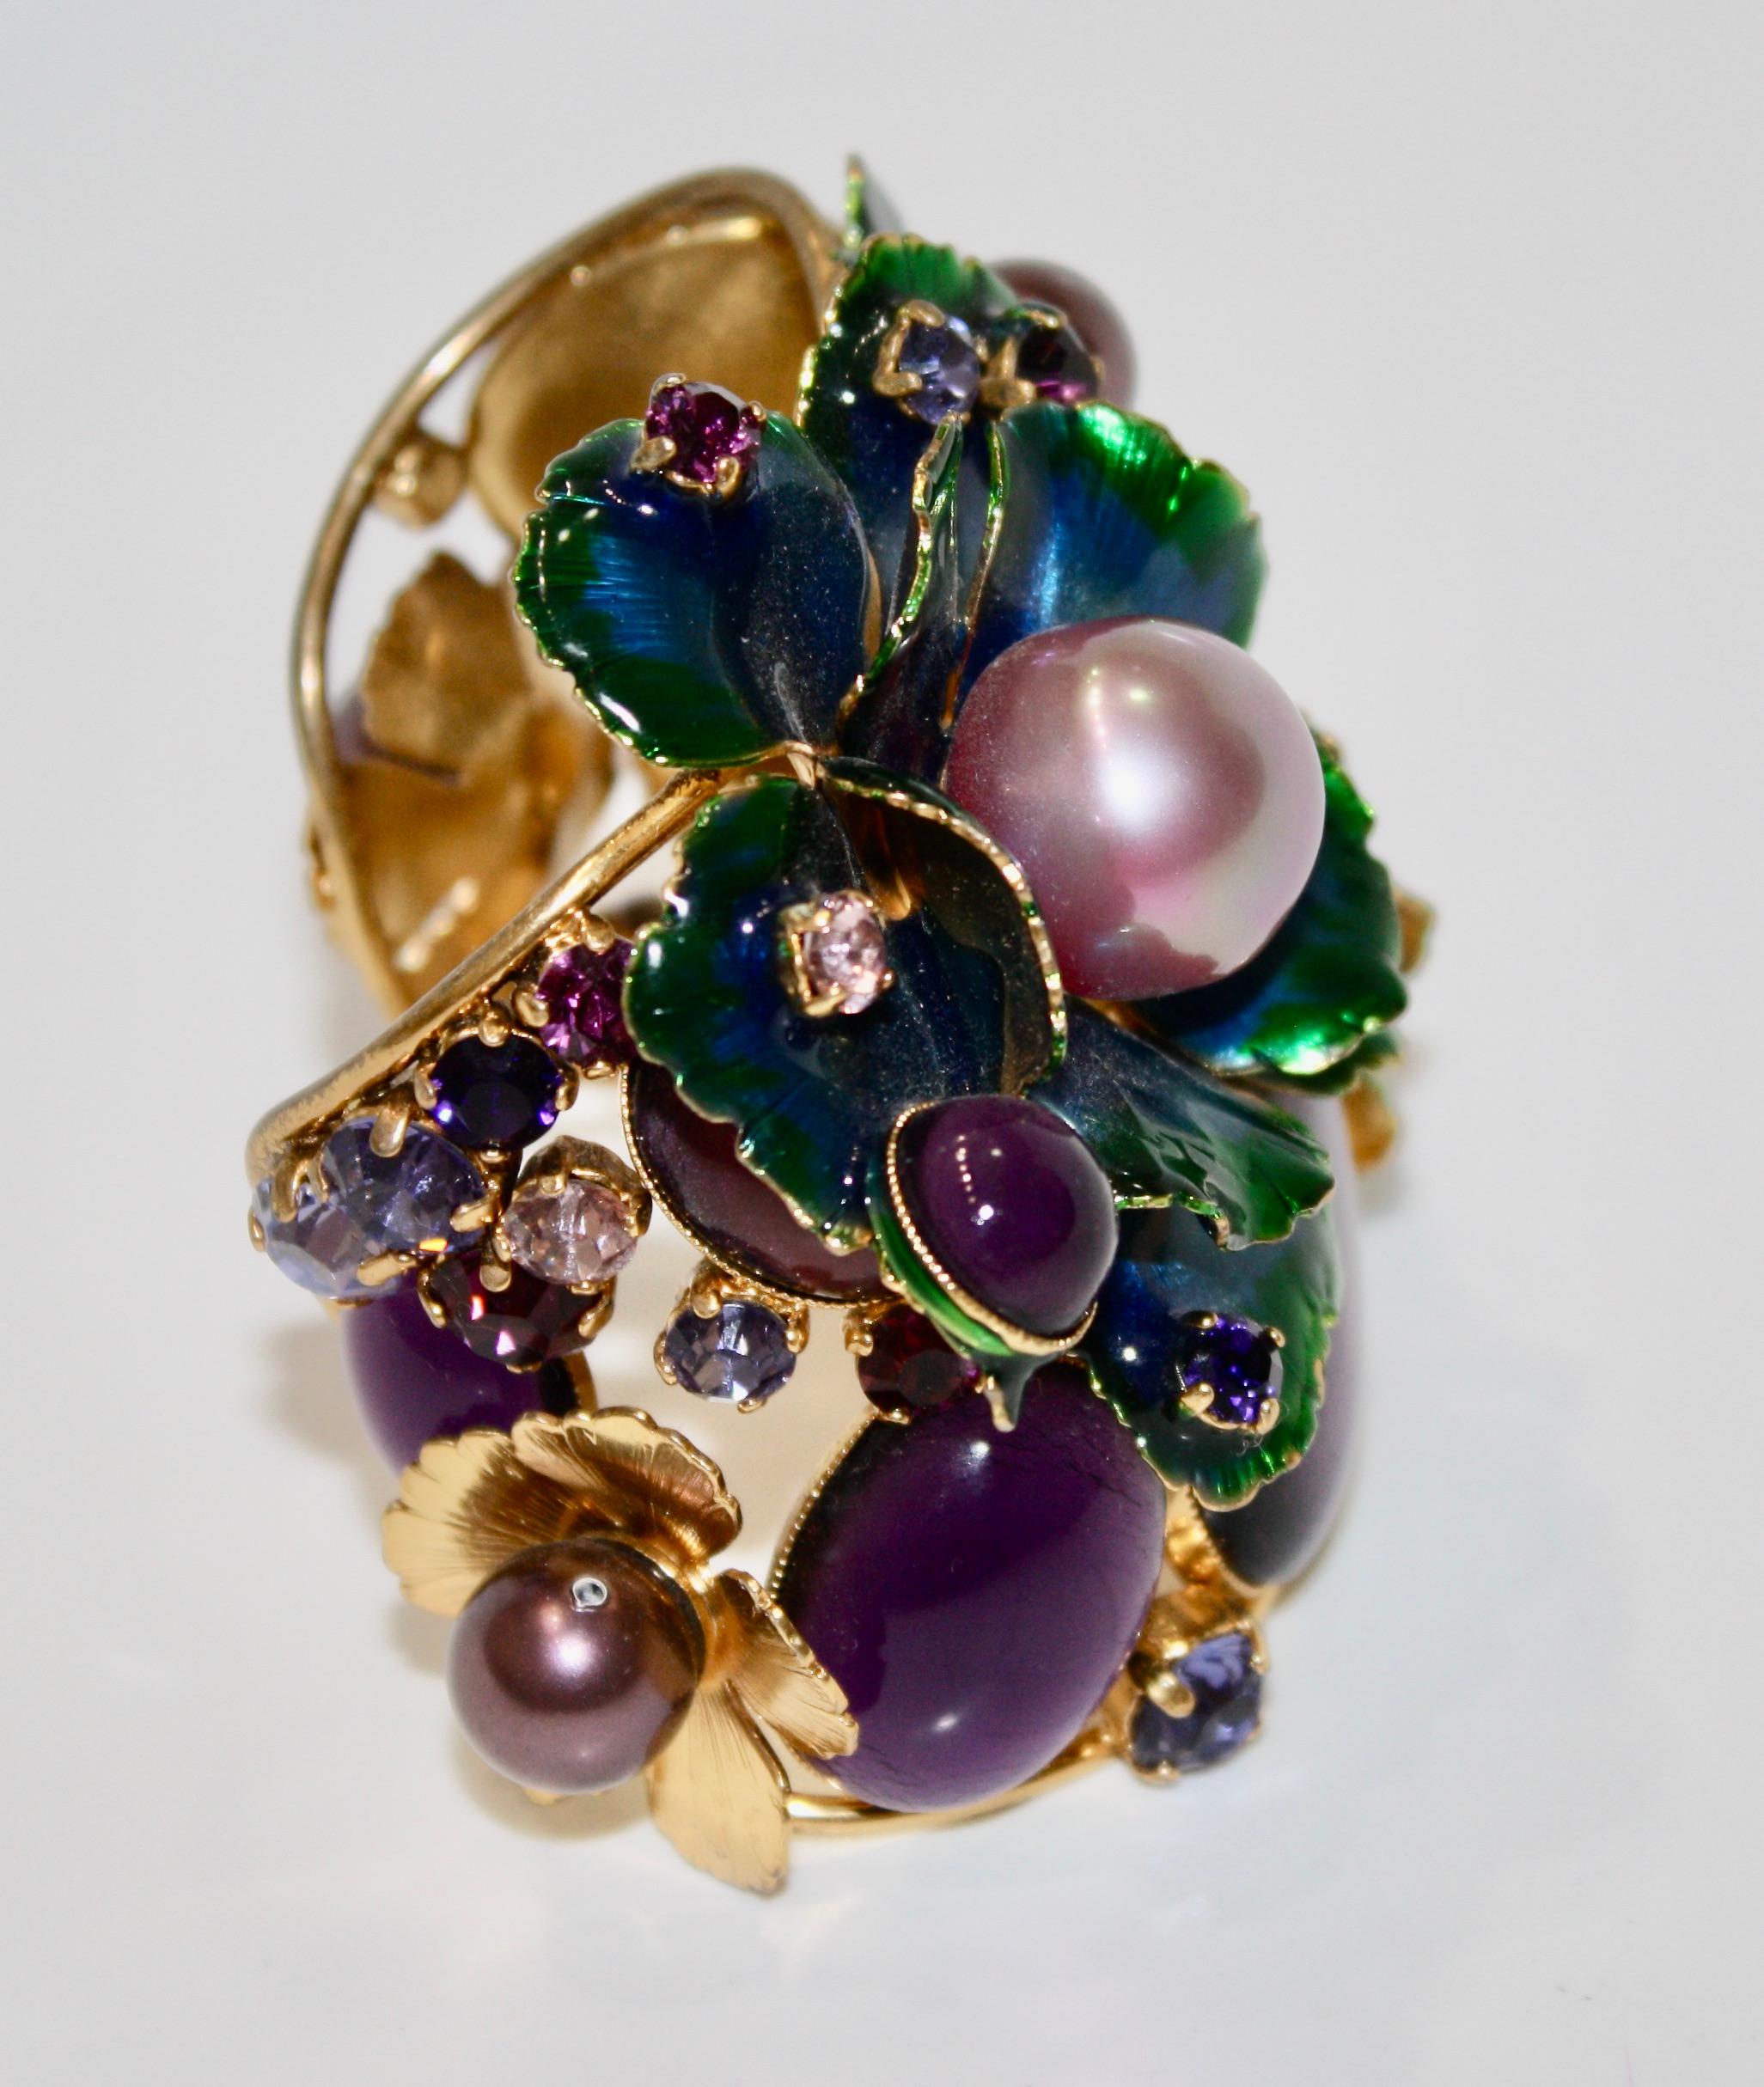 Enameled flowers in shades of blue and green, handmade glass pearls and Swarovski crystal. Cuff is adjustable with a gentle squeeze.
24-carat gilded brass.